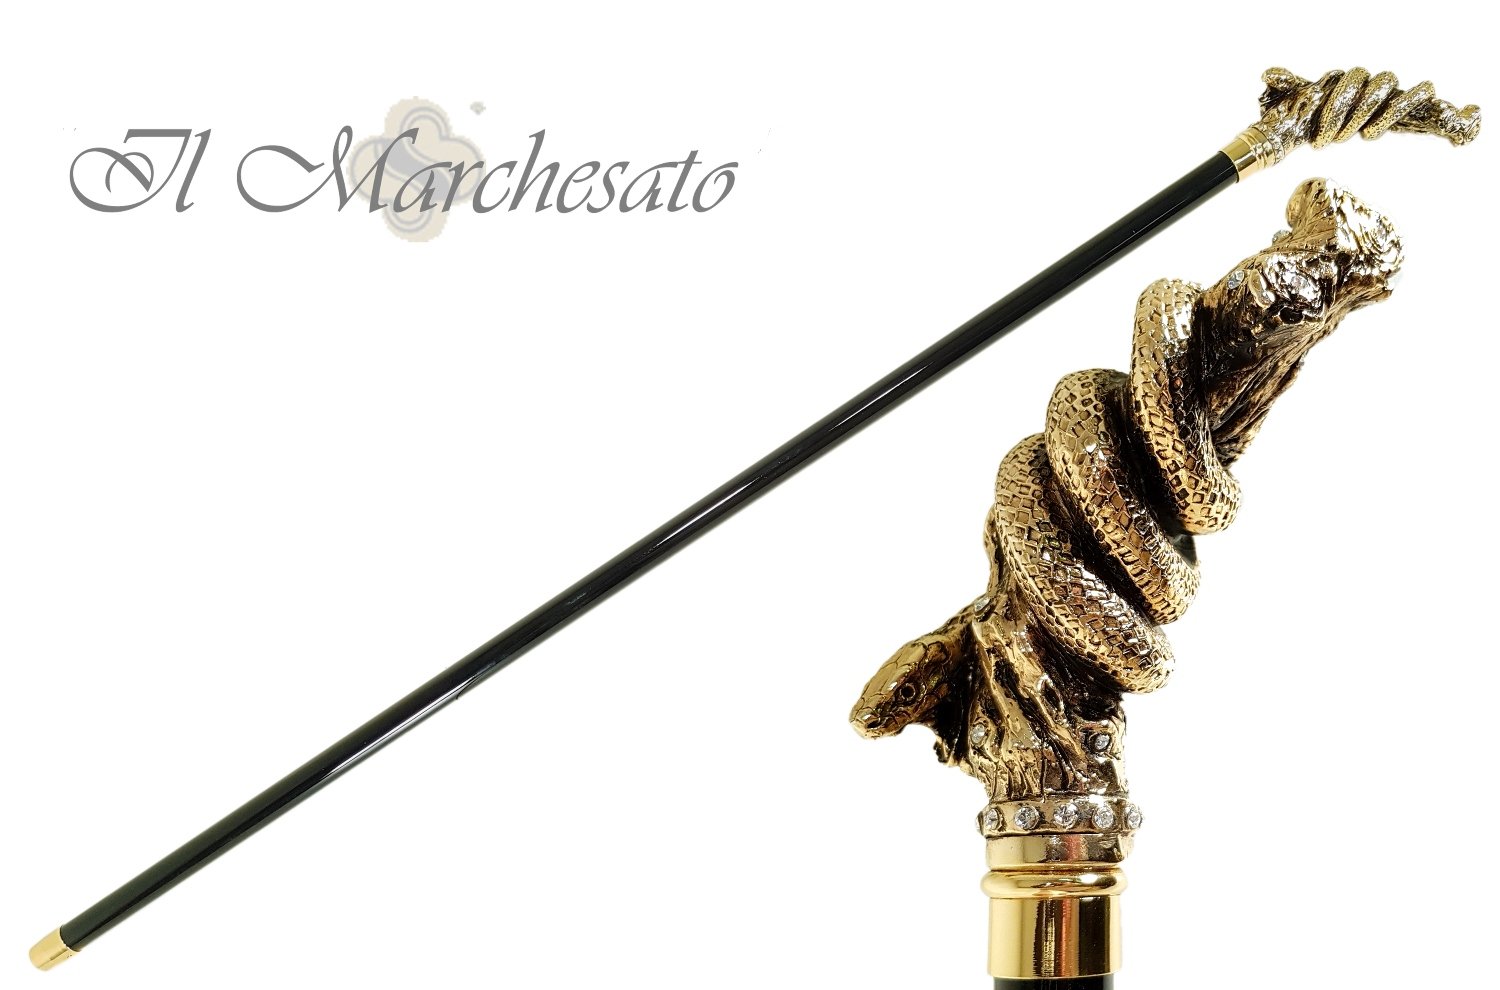 Fantastic Gold Plated Snake Embellished With Crystals - Walking Cane - il-marchesato